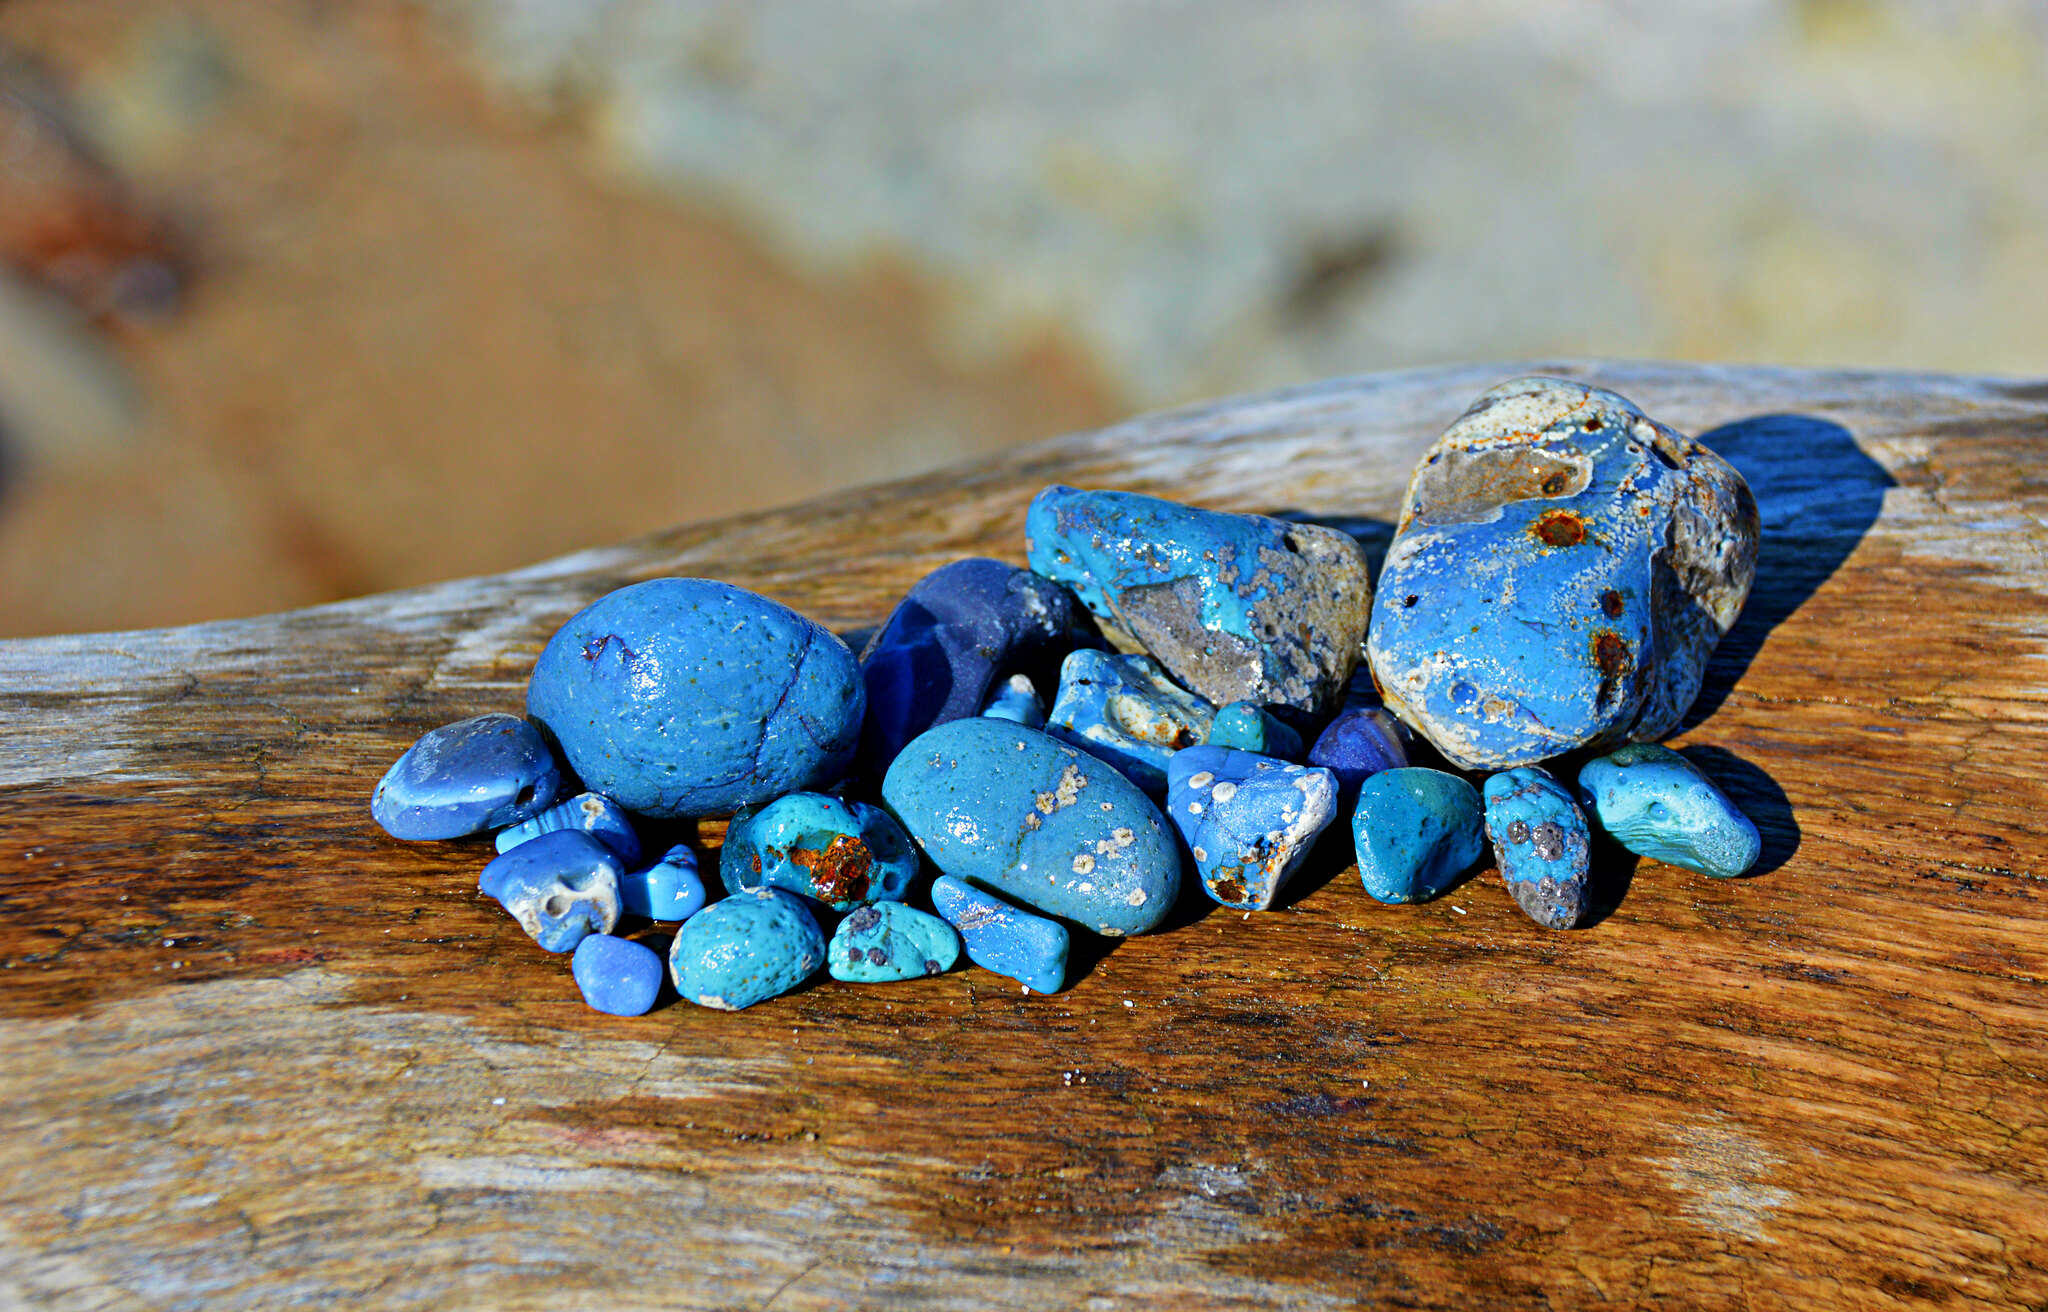 How to look for Leland Blue stone, a Michigan rock hunting treasure 